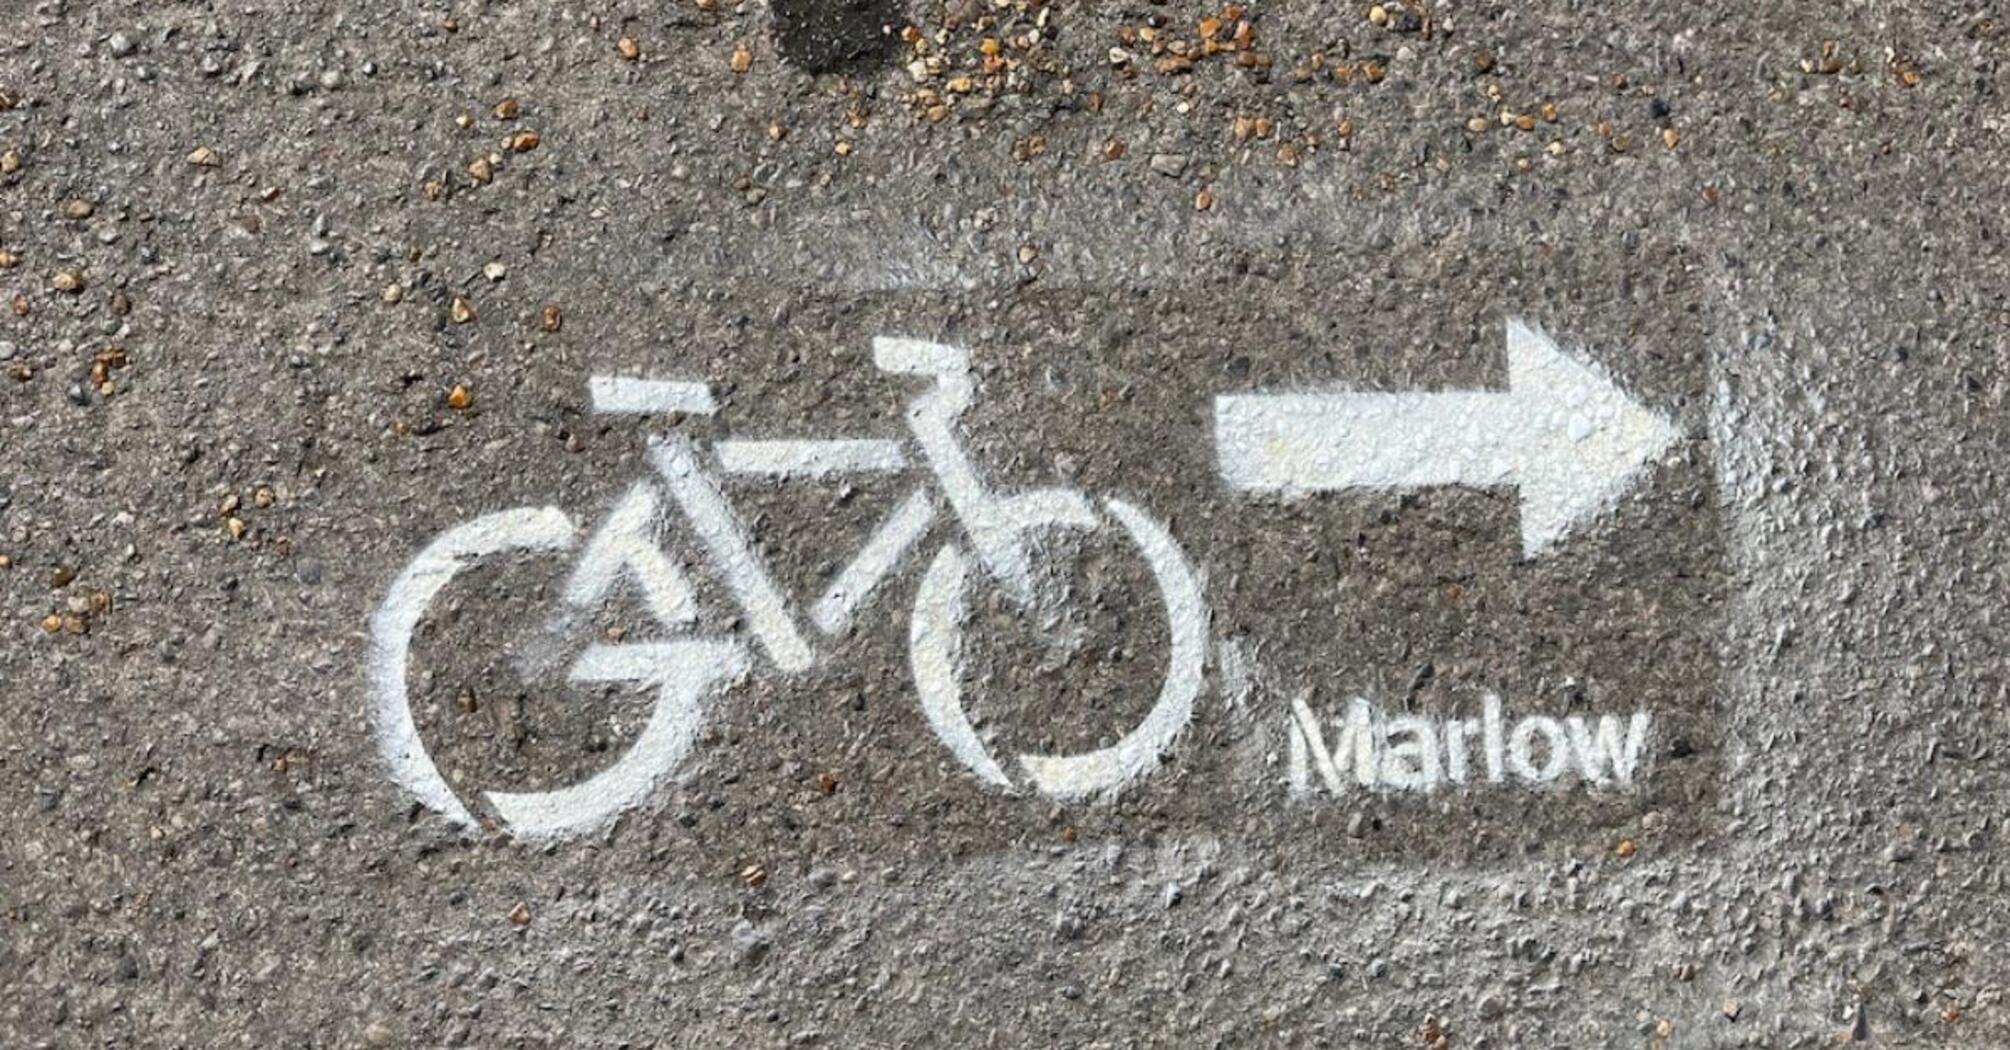 New road markings for cyclists by unknown activists in Marlow: details